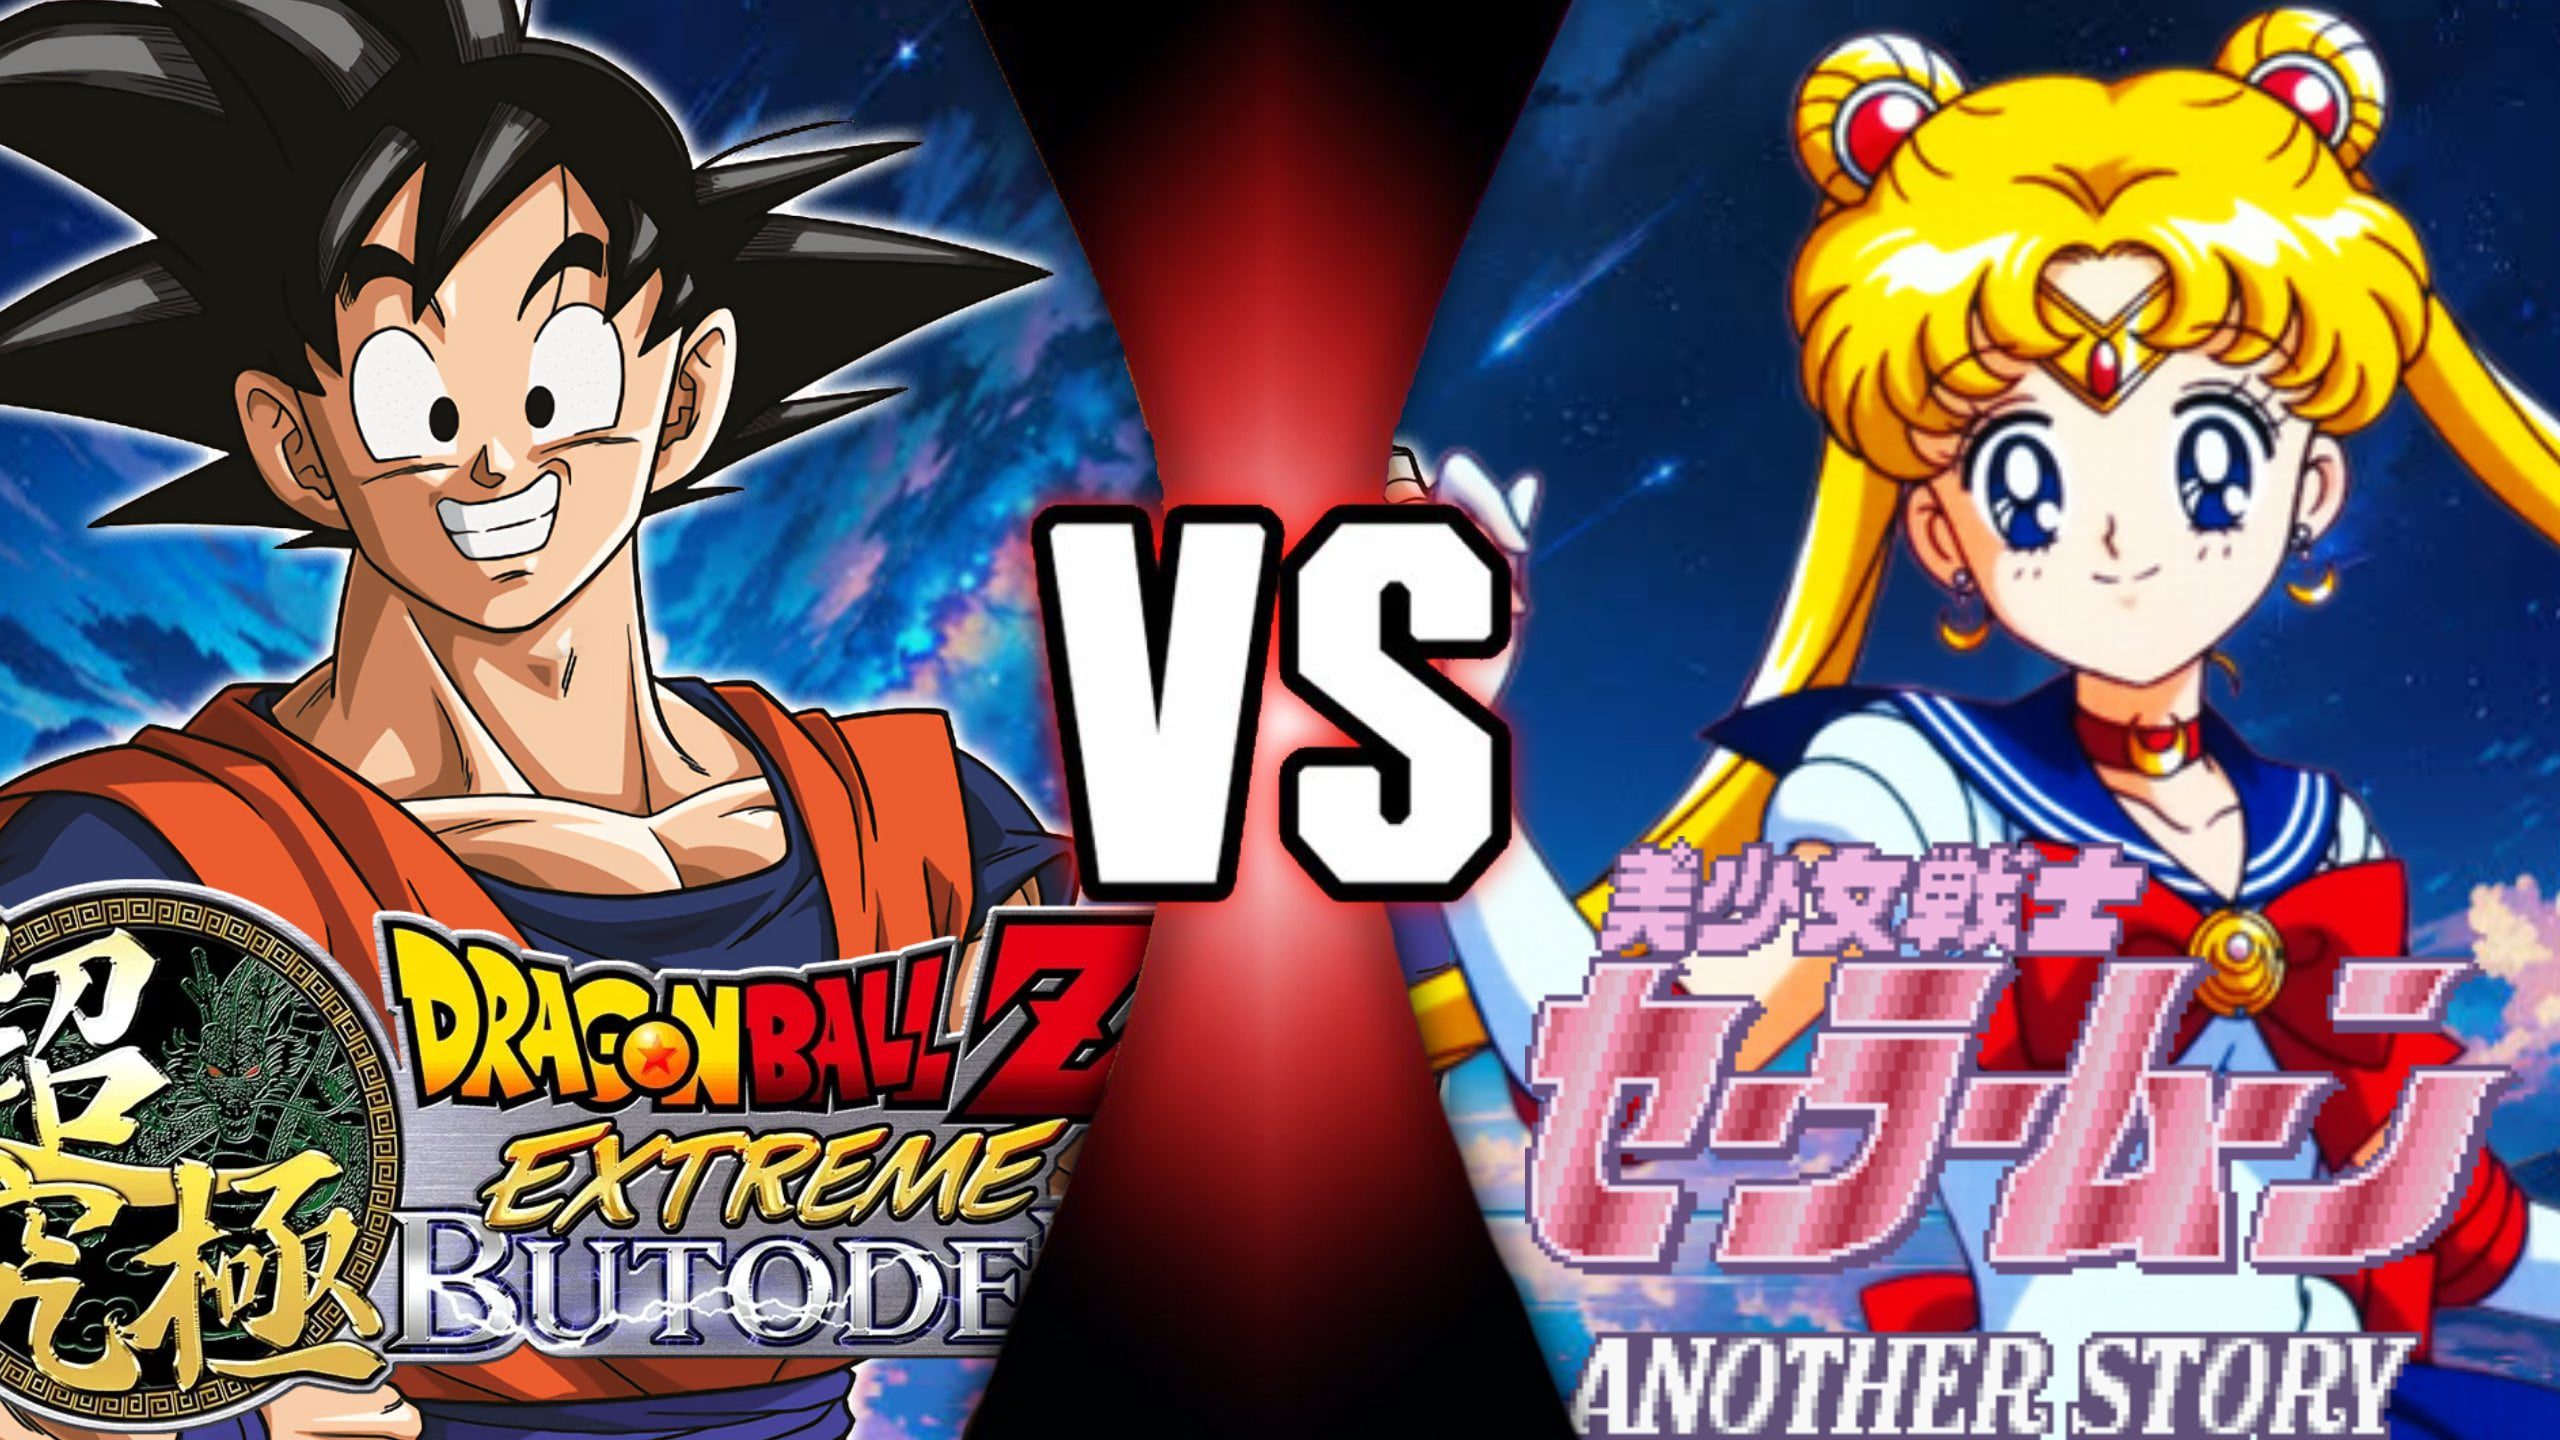 sailor moon vs goku who would win in a battle of anime powerhouses